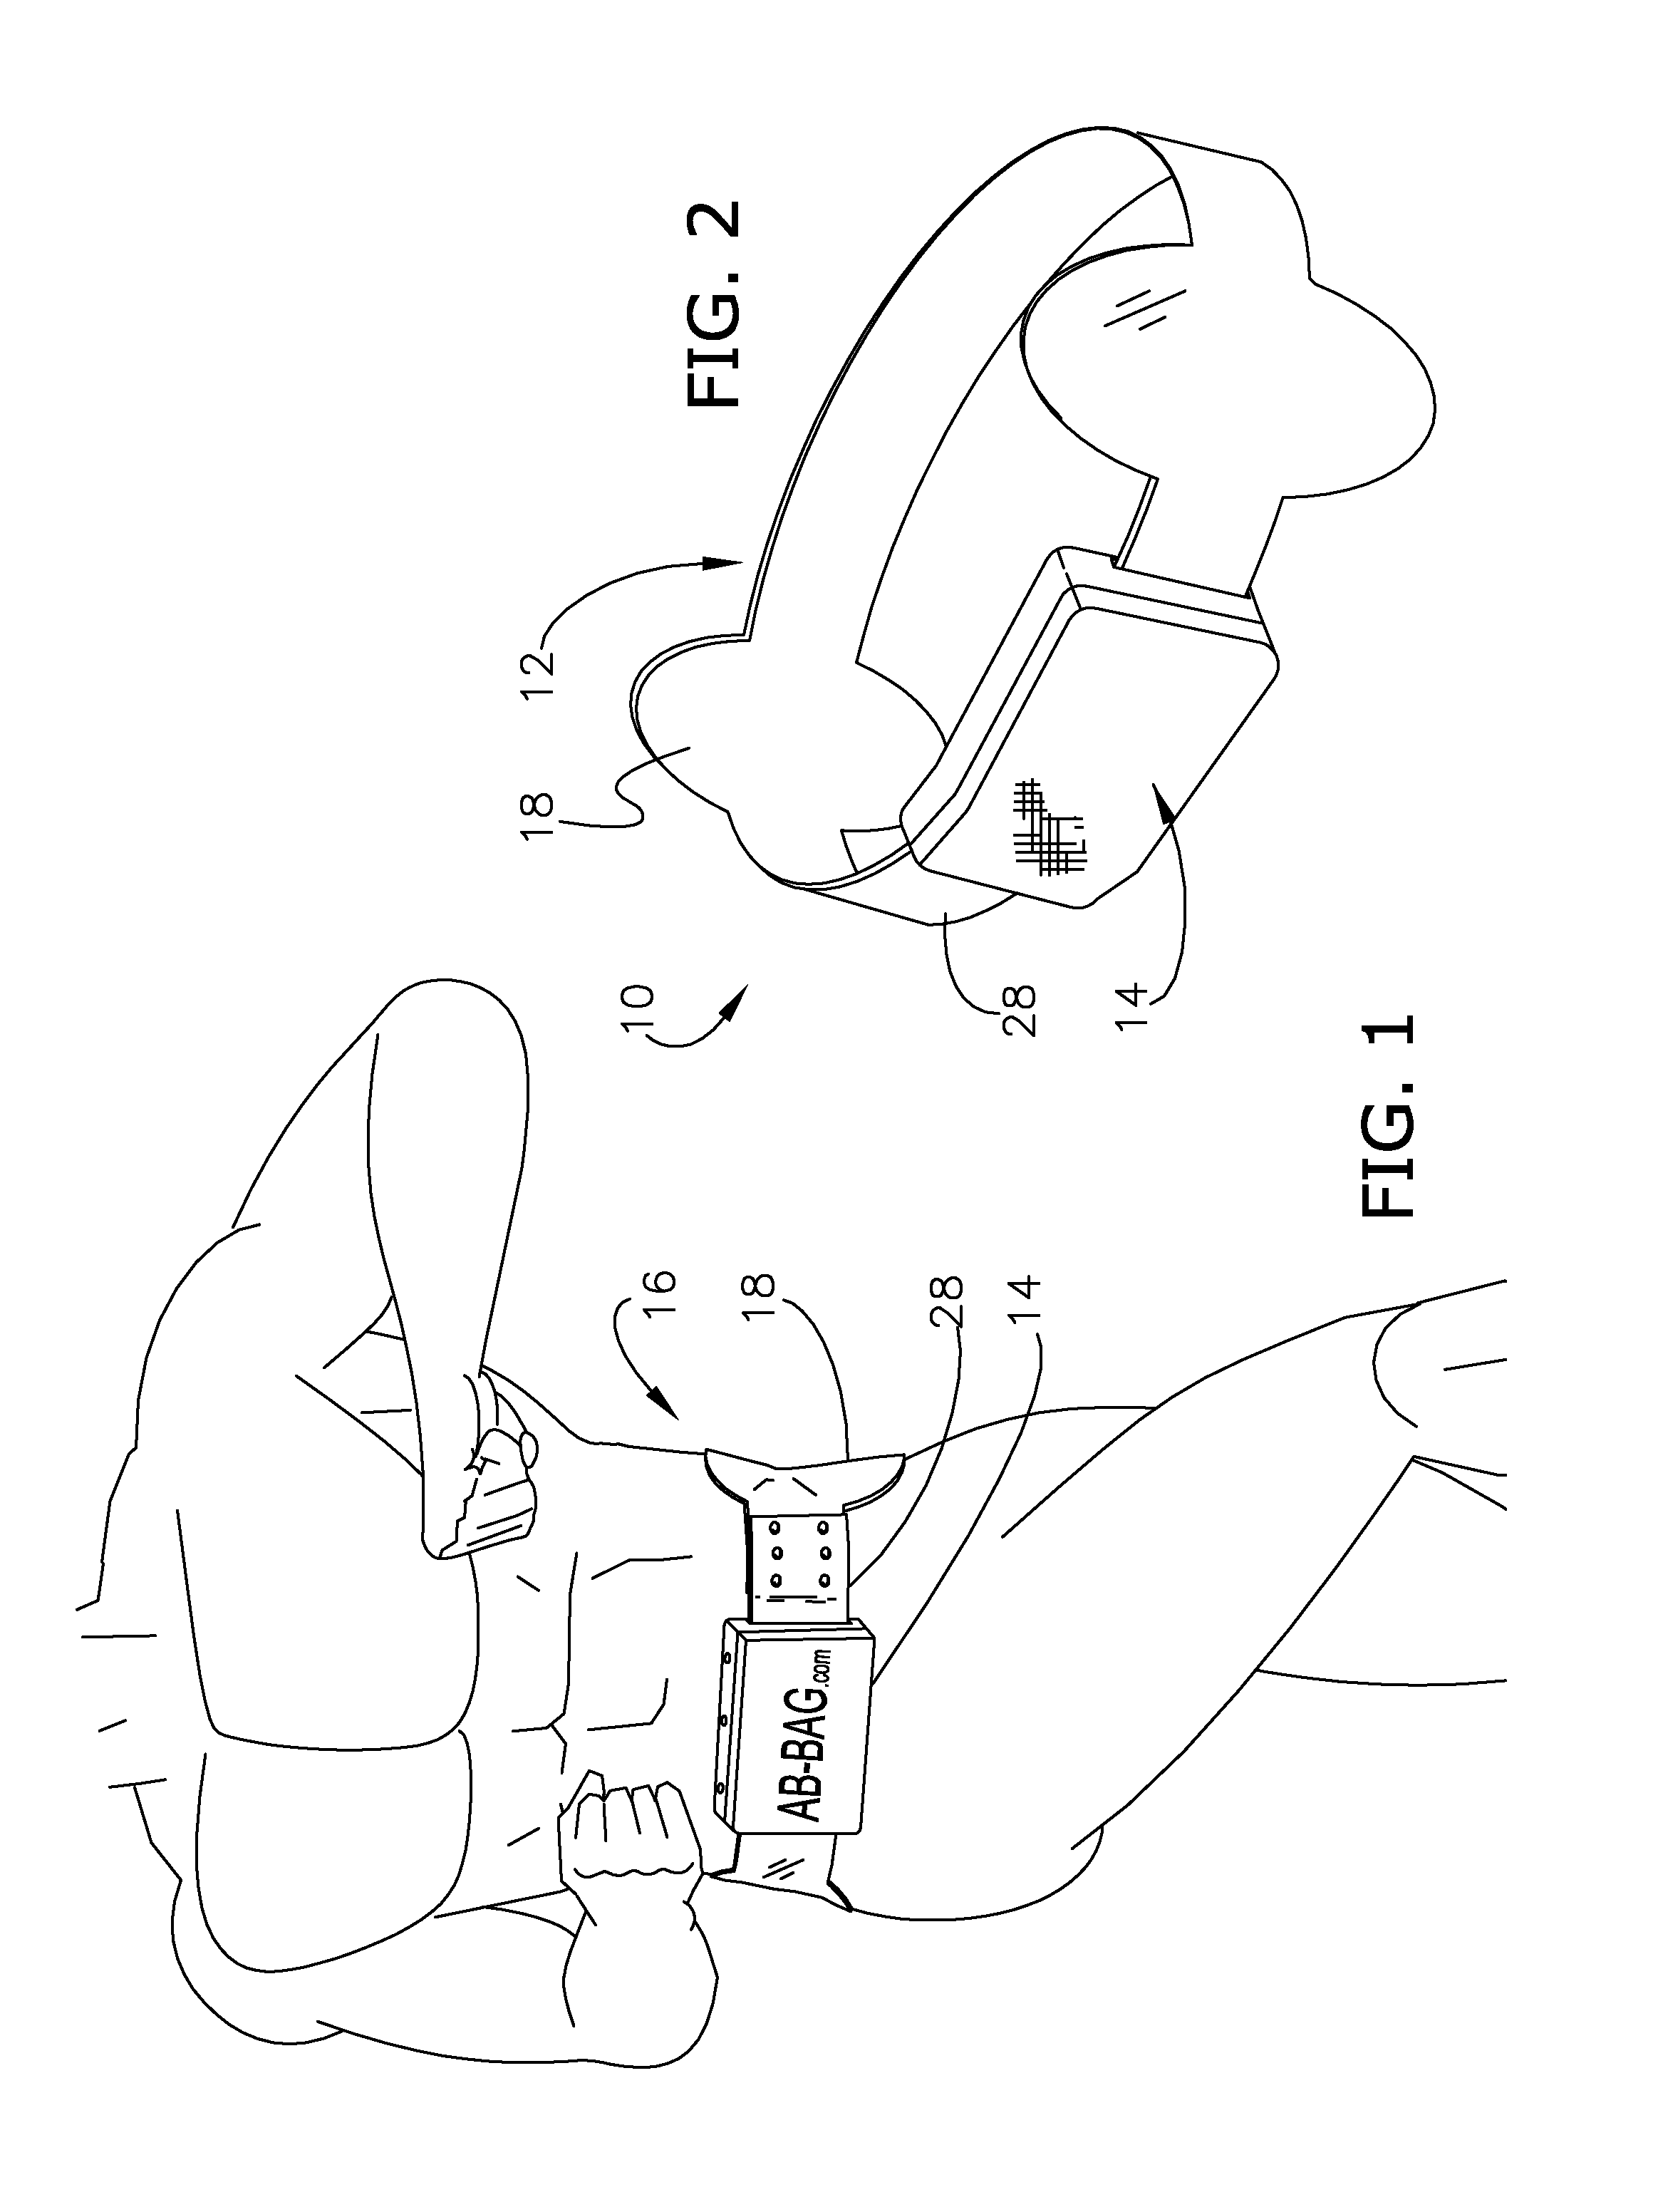 Compressive device and carrying compartment for use during exercise